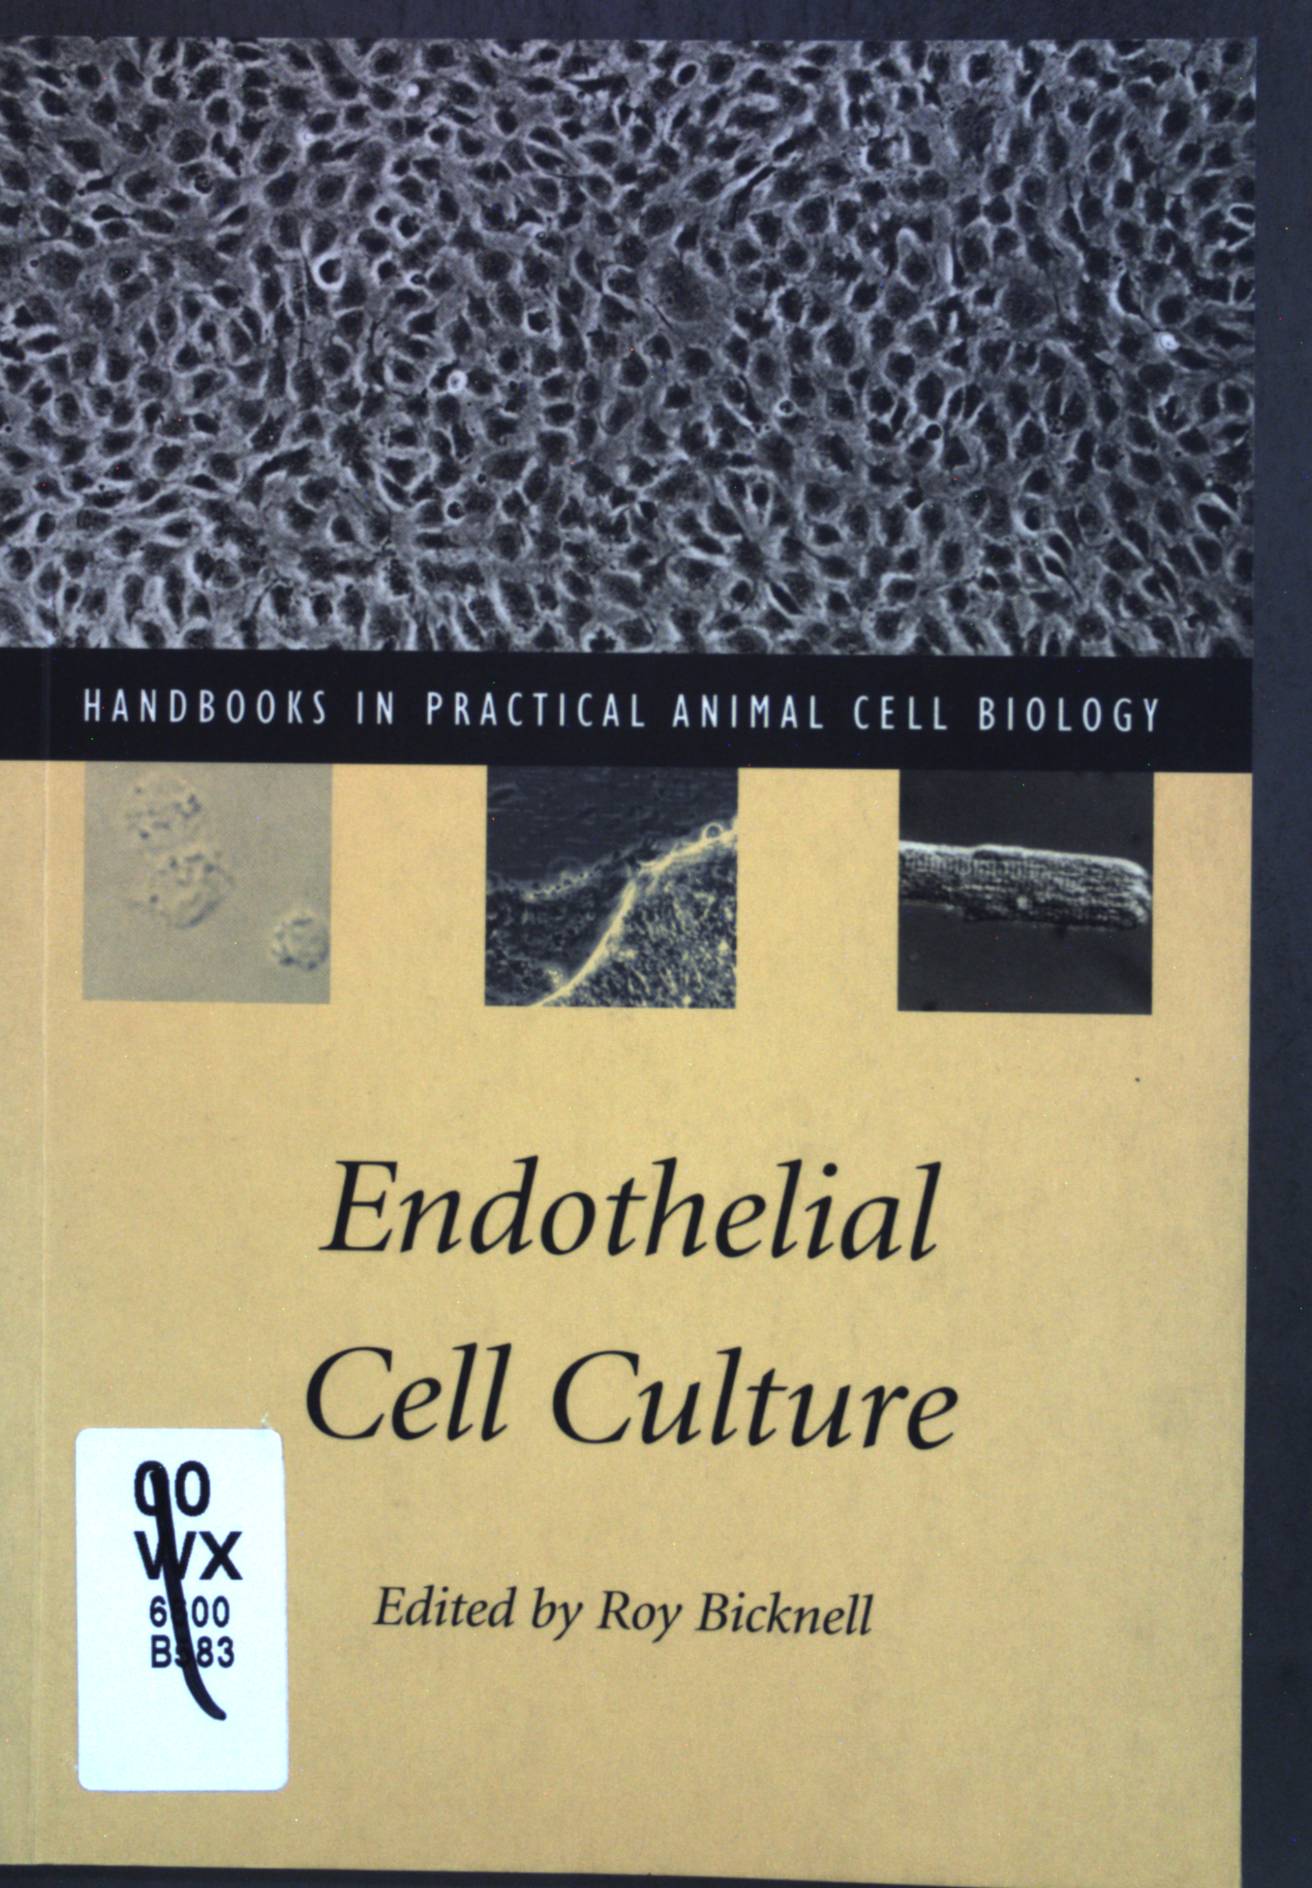 Endothelial Cell Culture (Handbooks in Practical Animal Cell Biology) - Bicknell, Roy